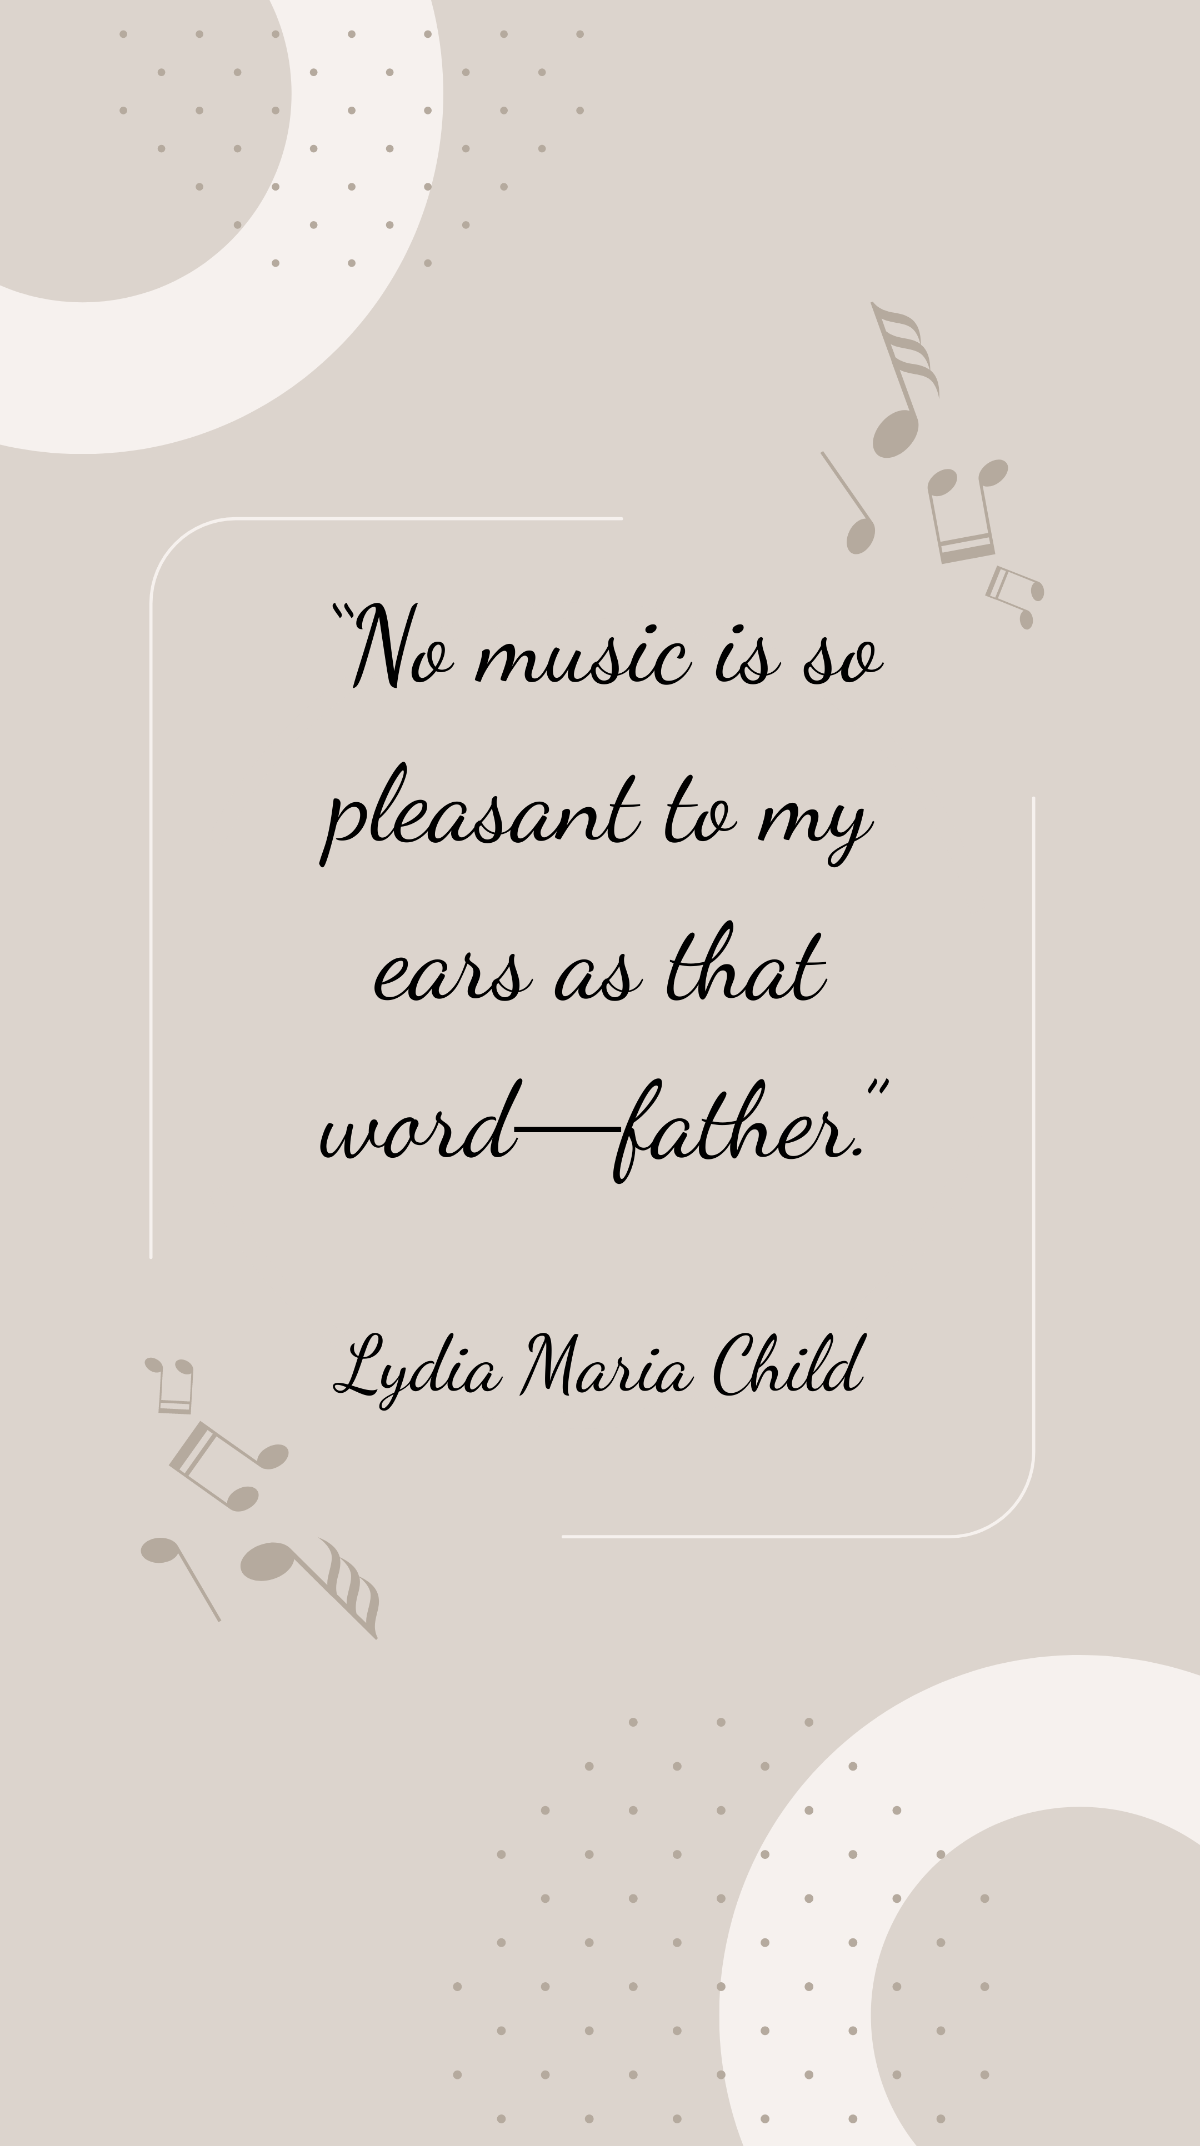 Lydia Maria Child - “No music is so pleasant to my ears as that word father.” Template